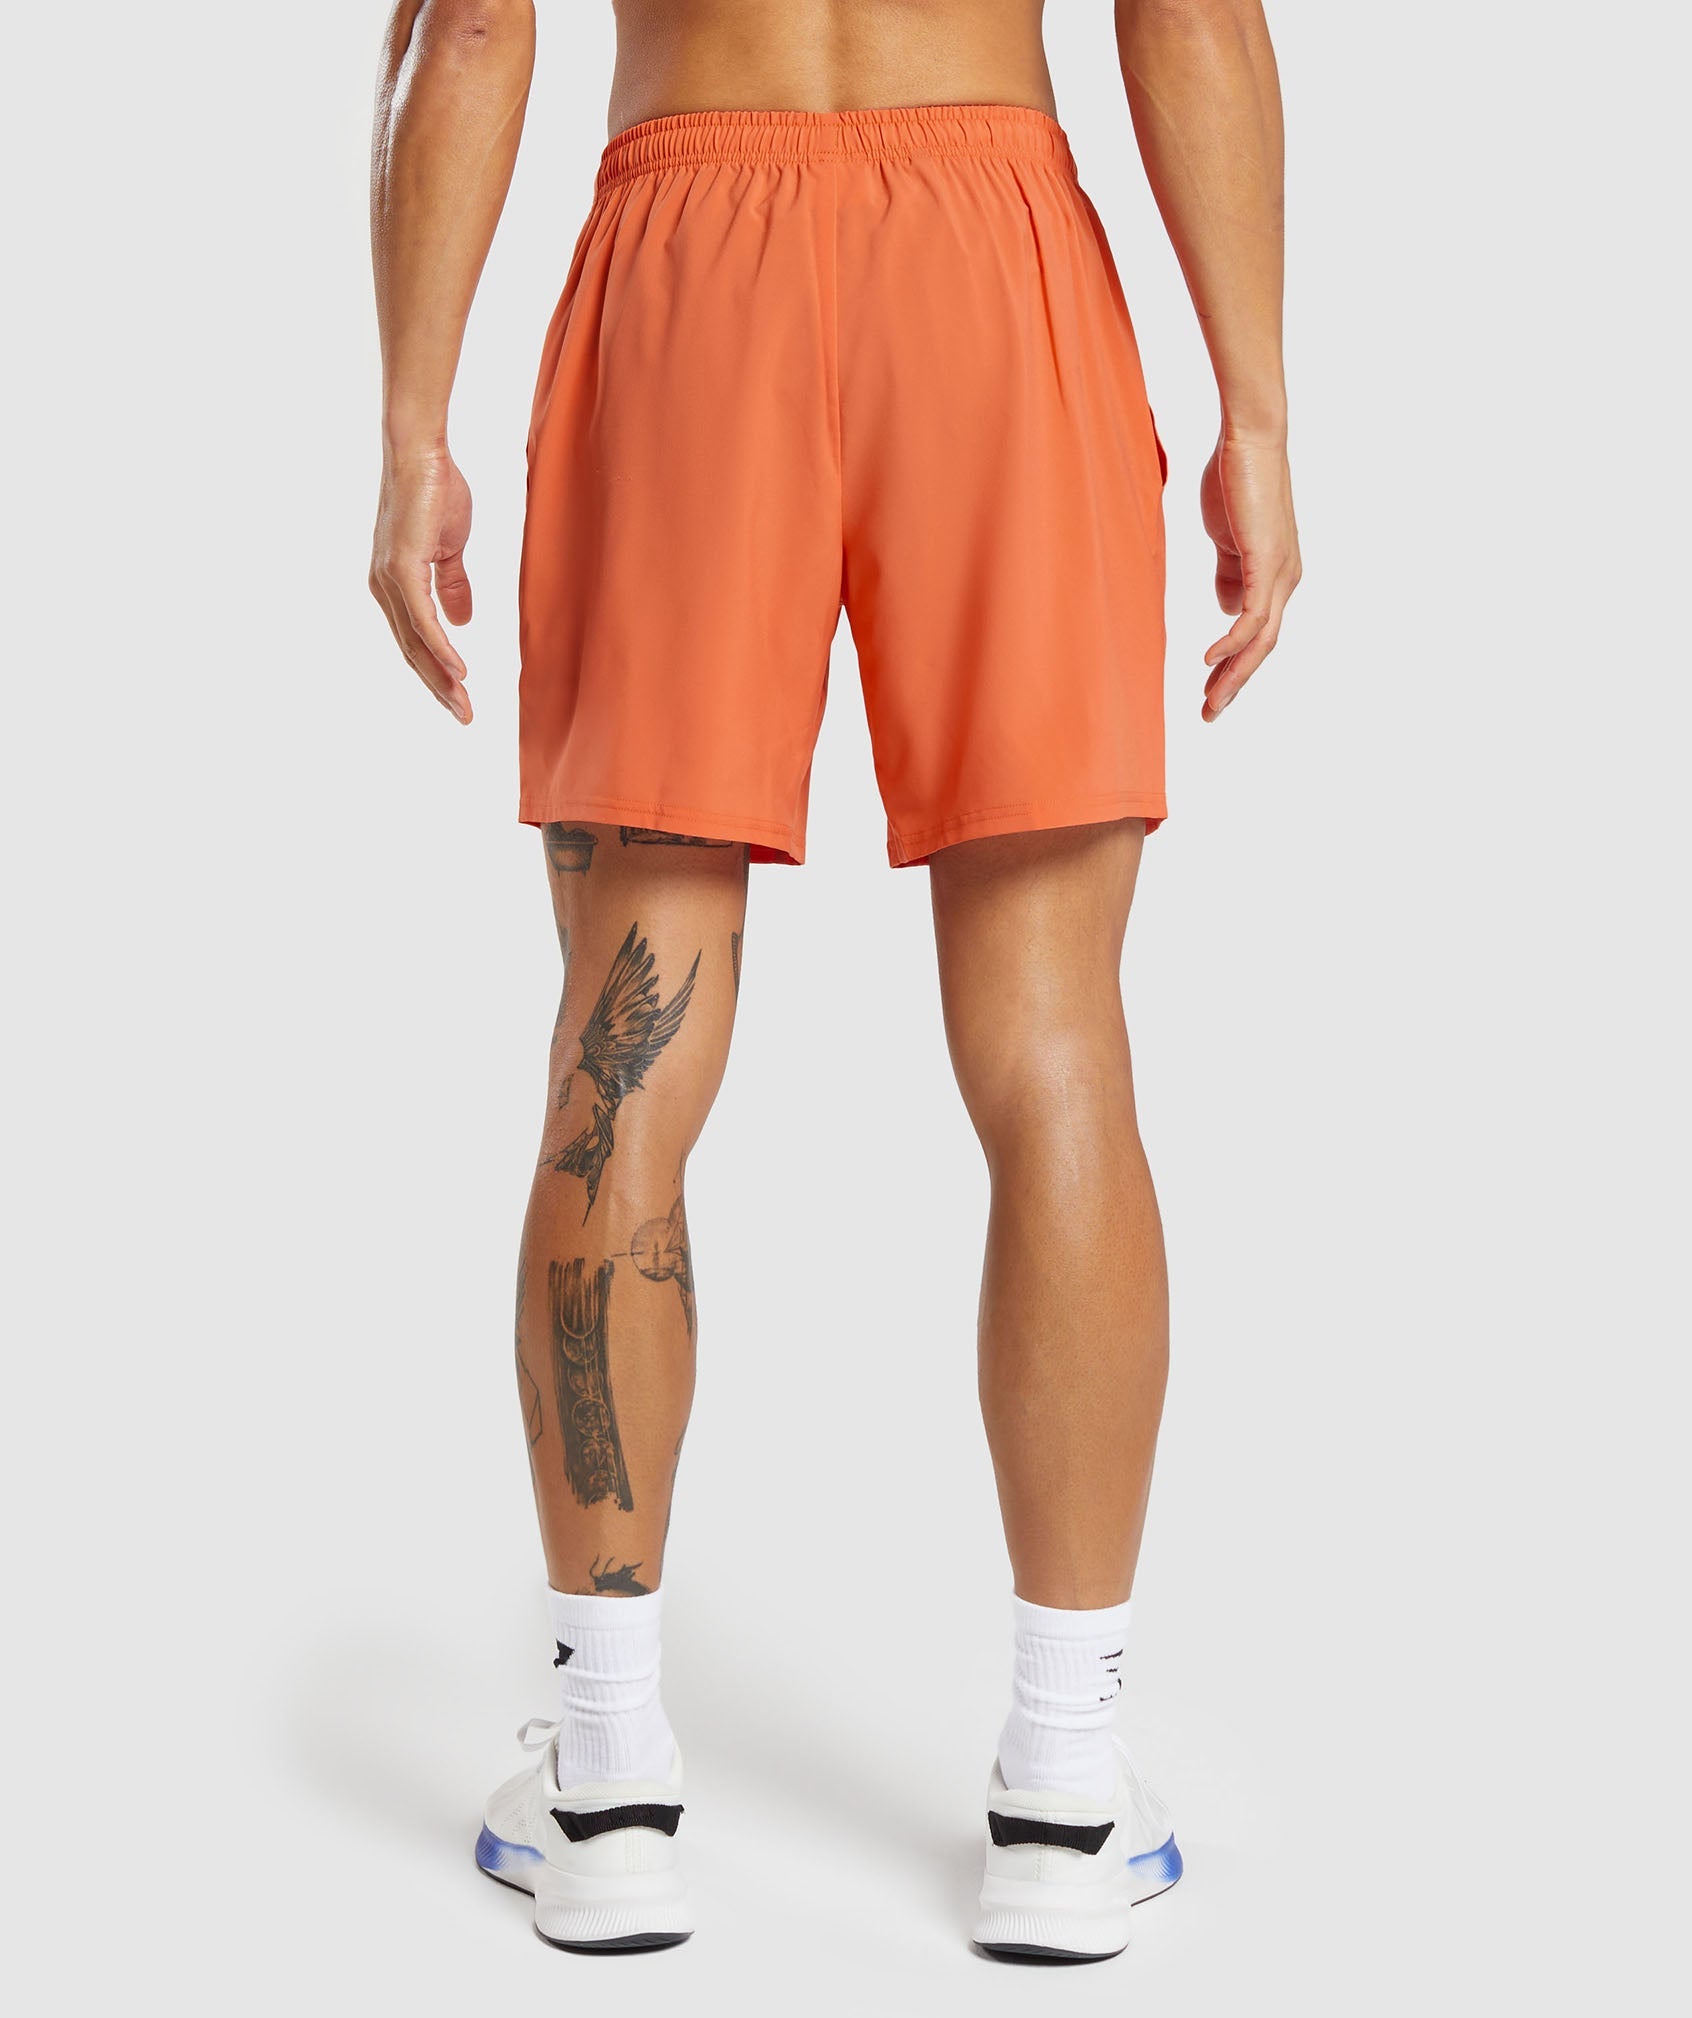 Arrival 7" Shorts